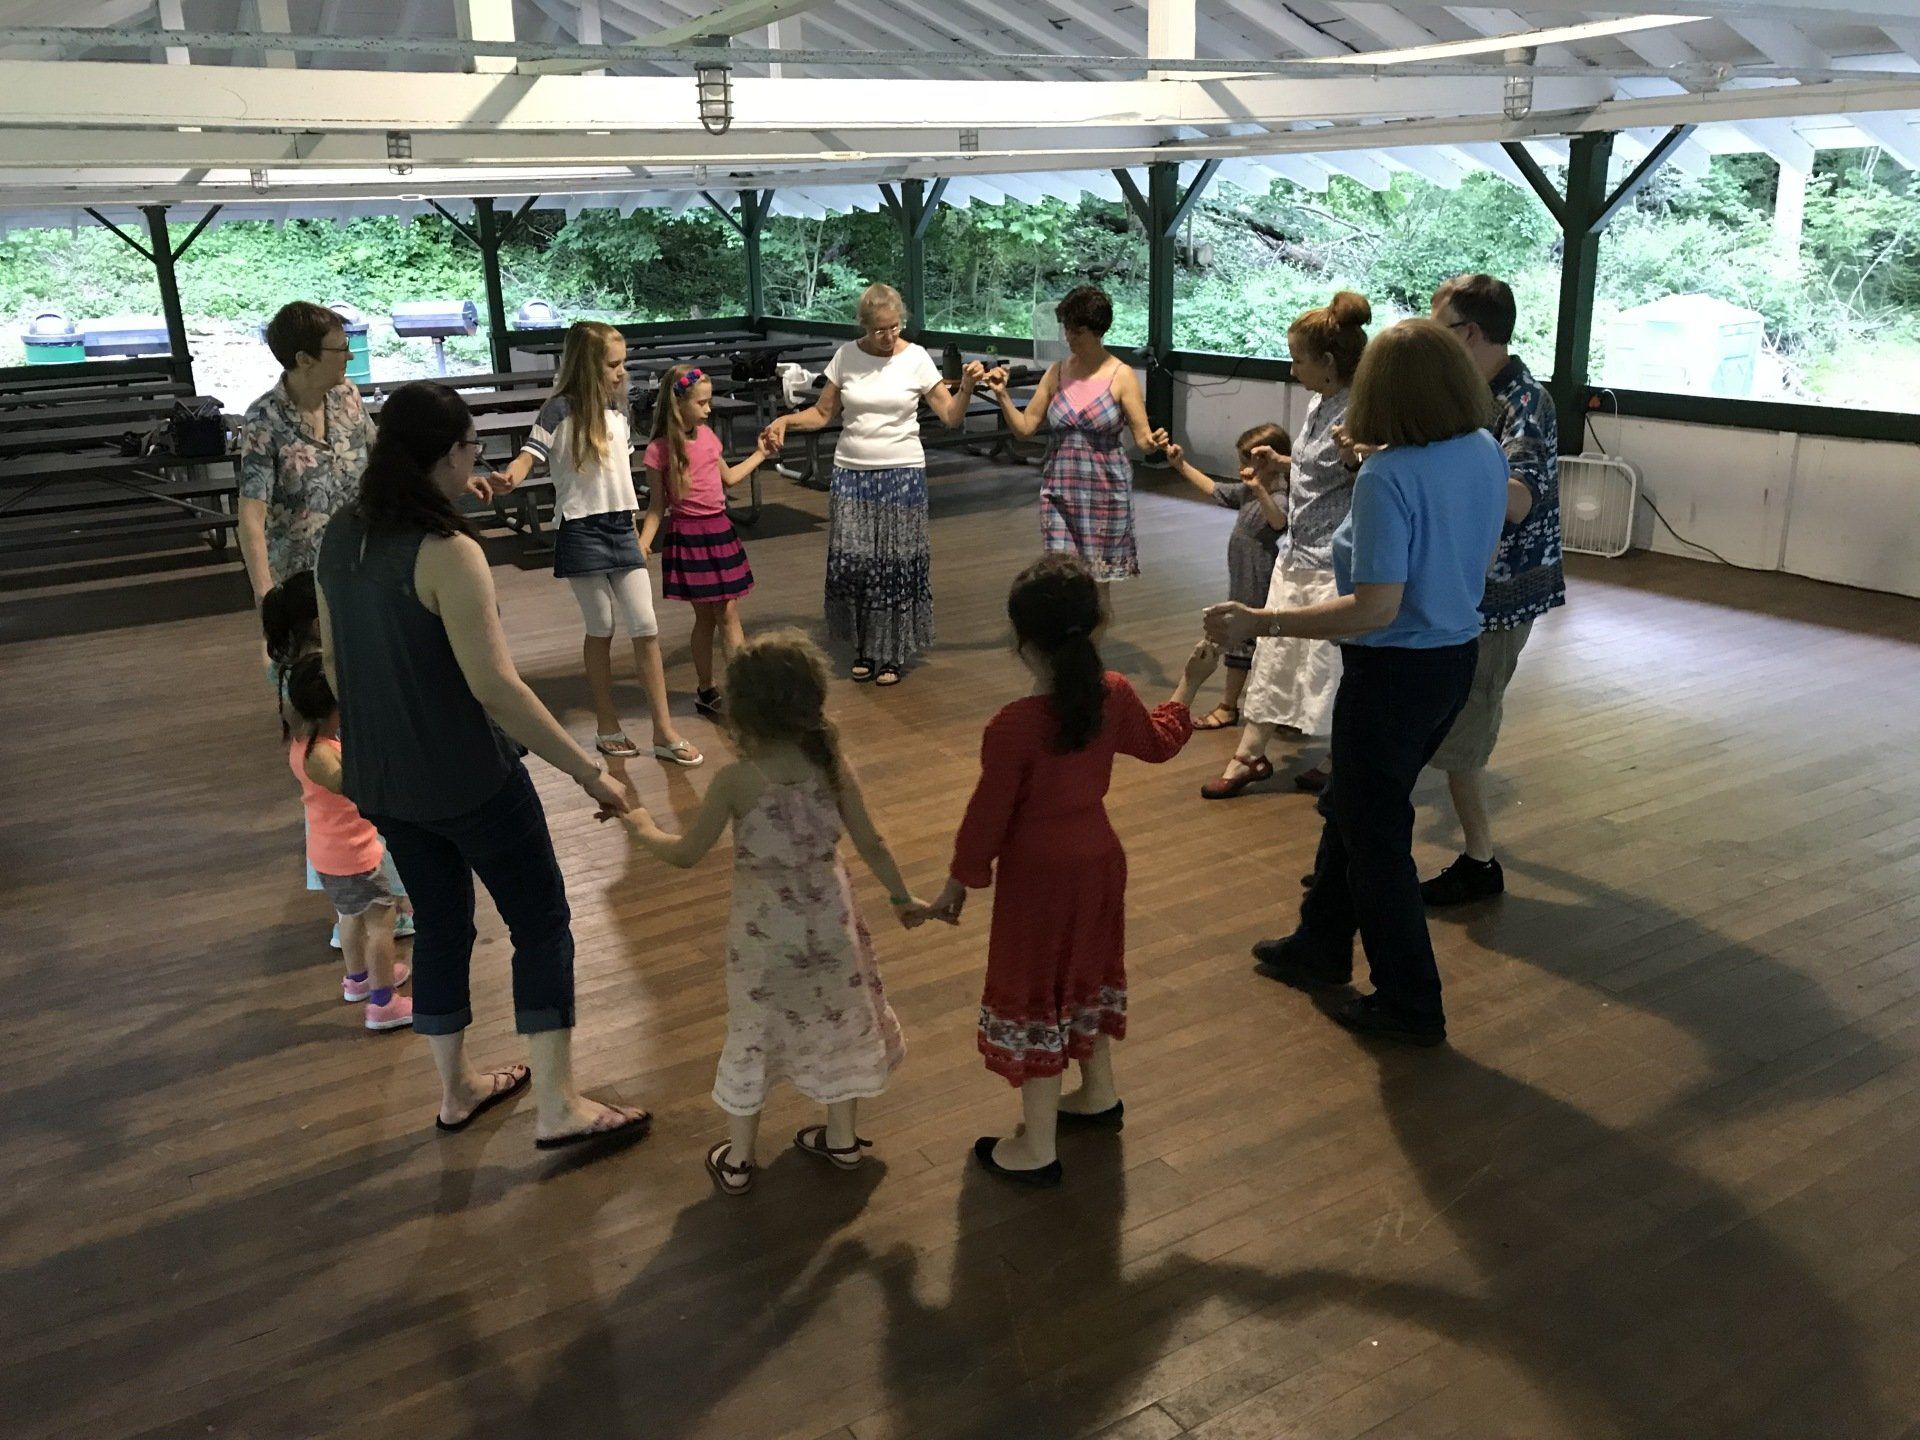 A group of people are dancing in a circle on a wooden floor.